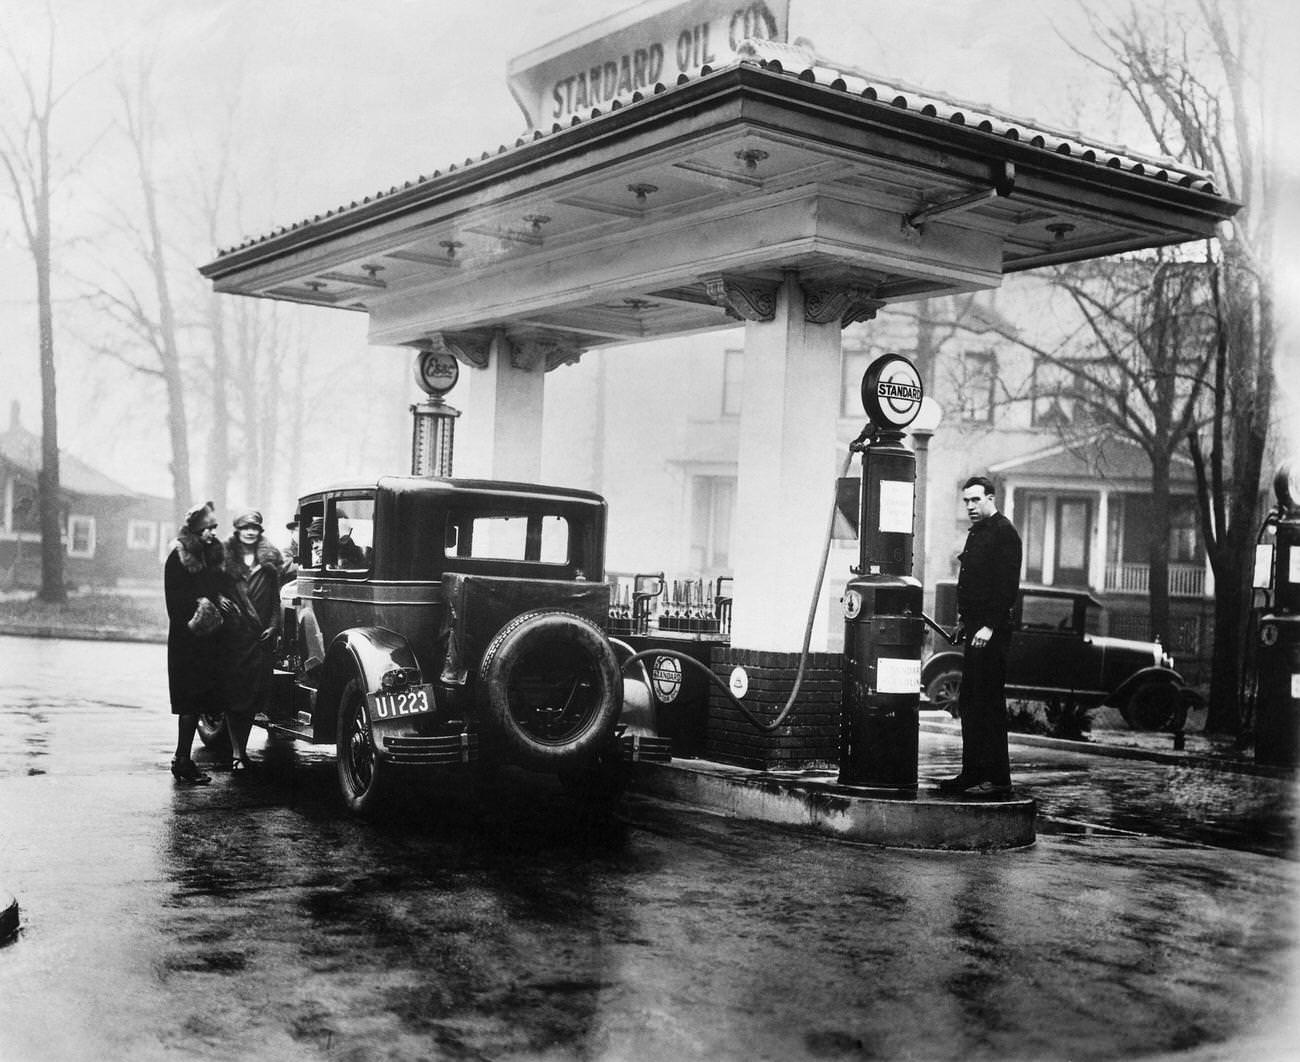 Car fueling up at a gas station in New Jersey, 1927.